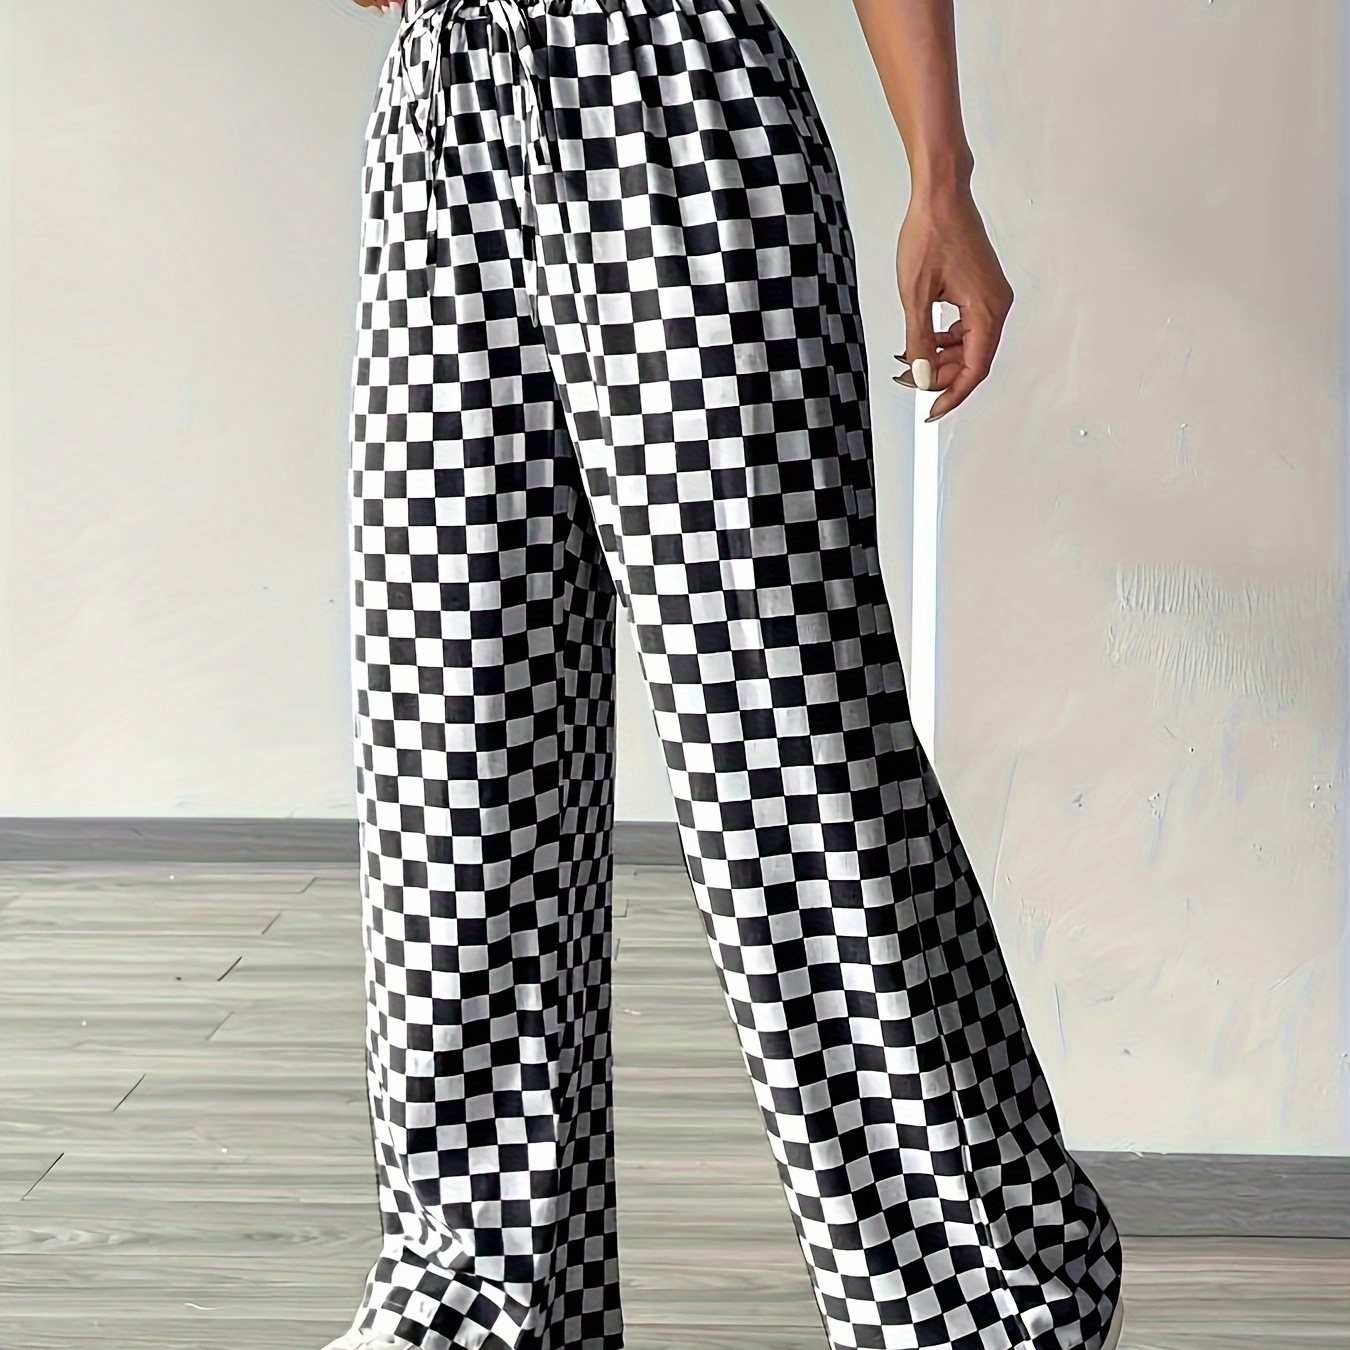 

Women's High Waisted Checkered Pants, Casual Loose Fit Trousers, Pants, Checkerboard Design, Elastic Waist With Drawstring